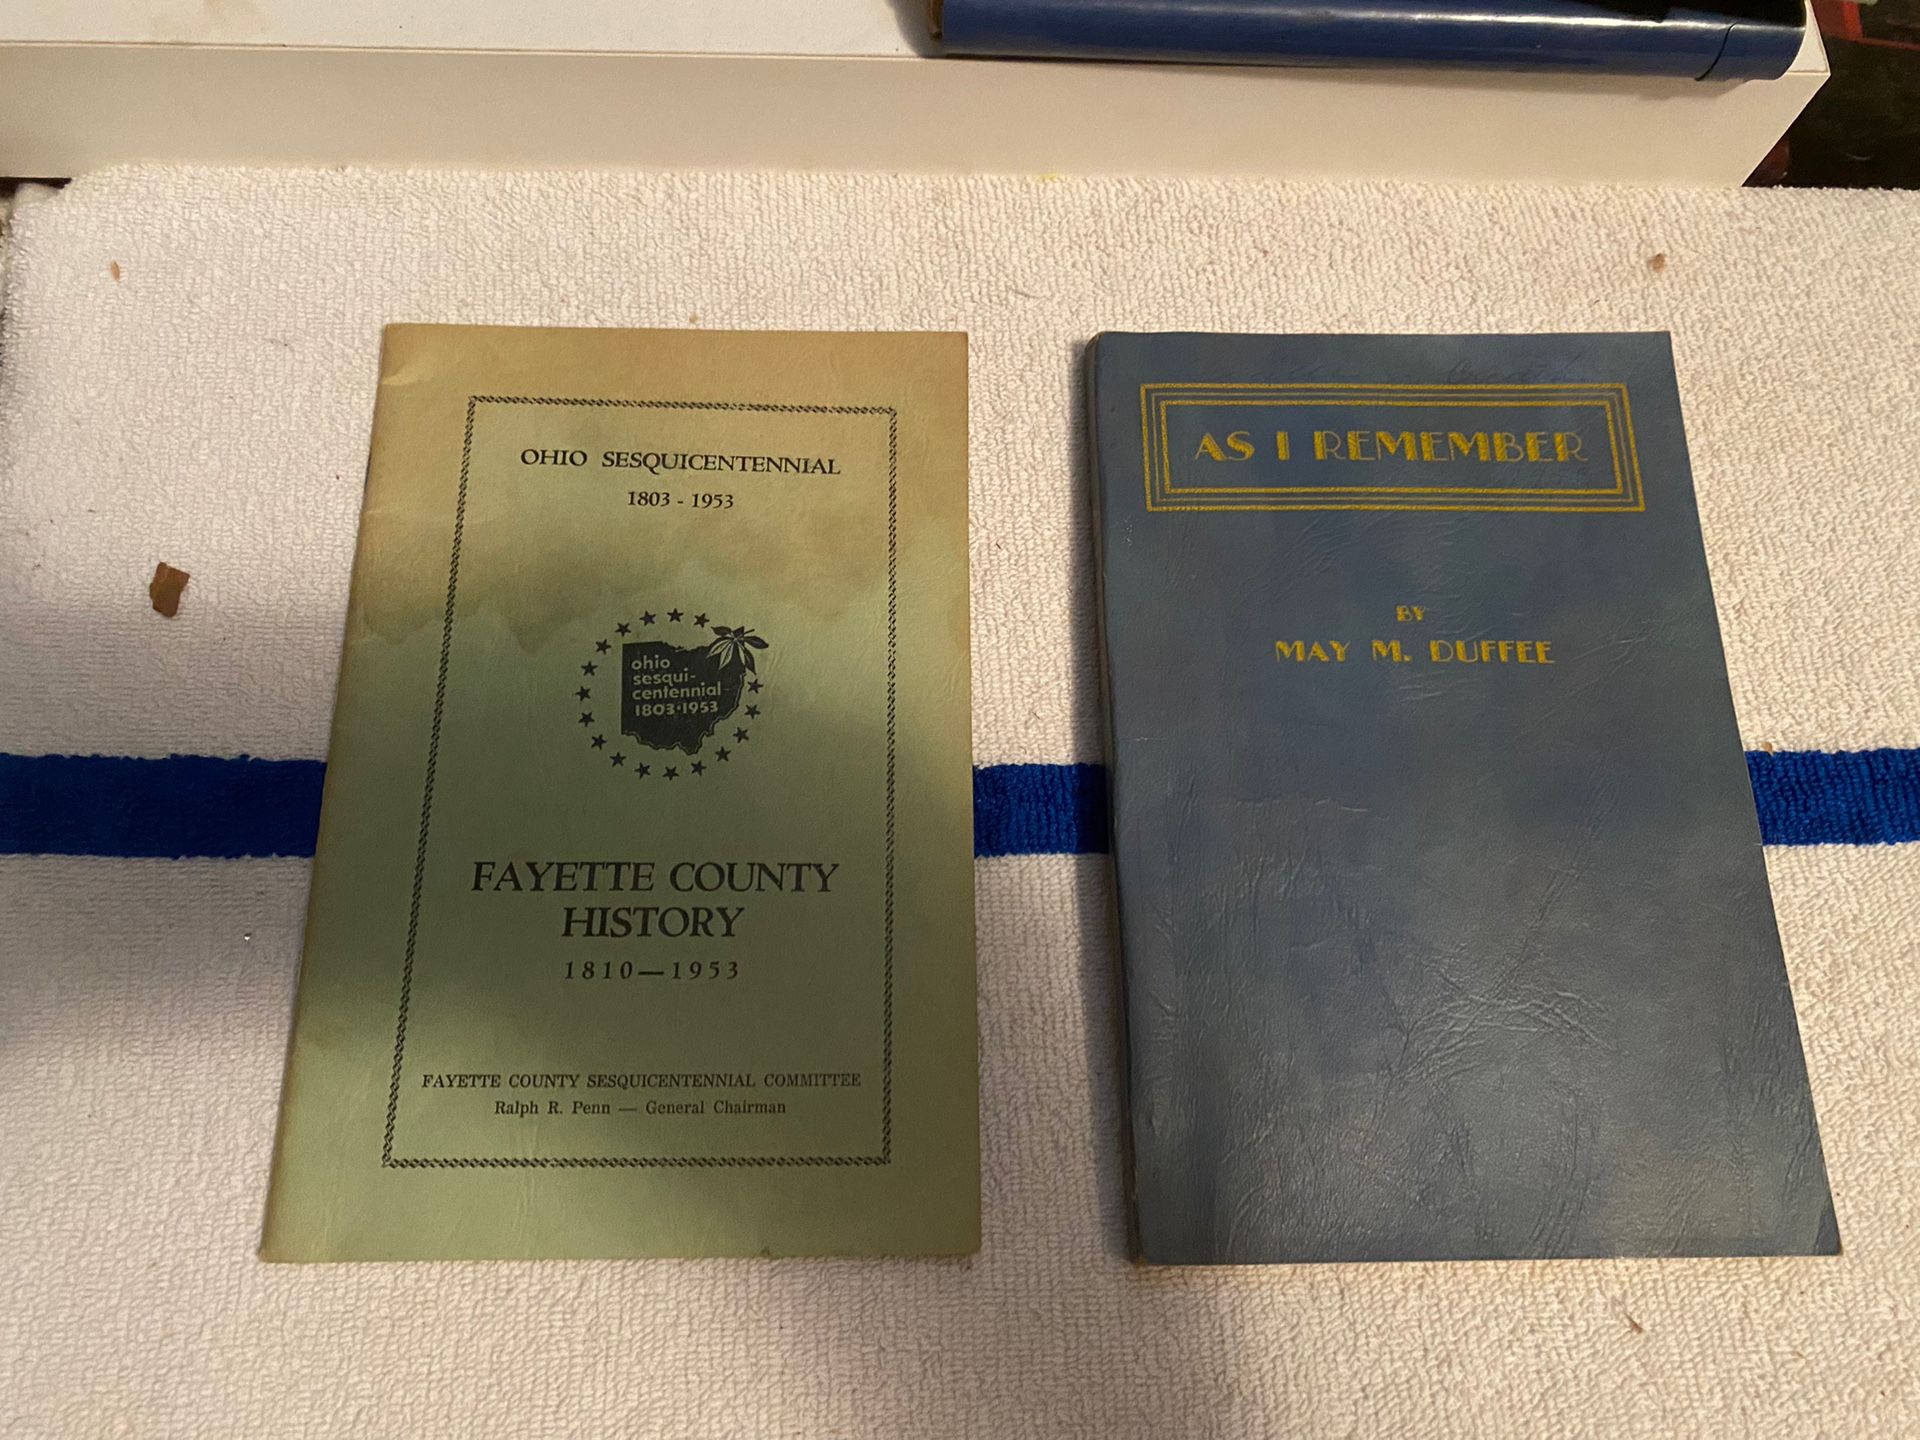 Very old books and items from local counties 